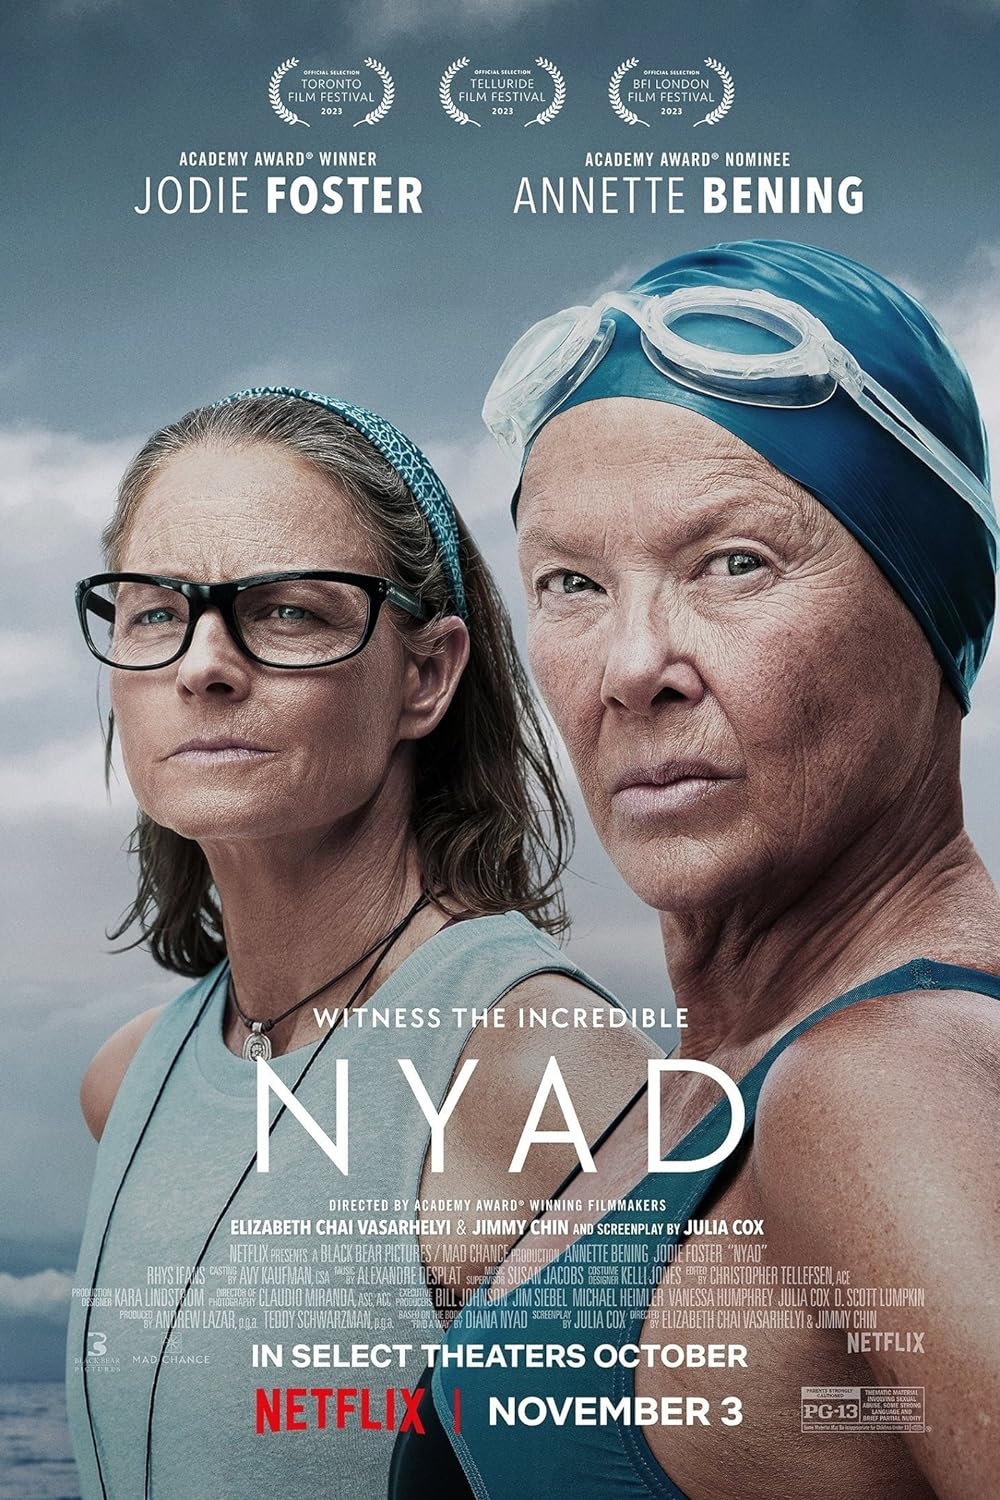 Jodie Foster in “Nyad”